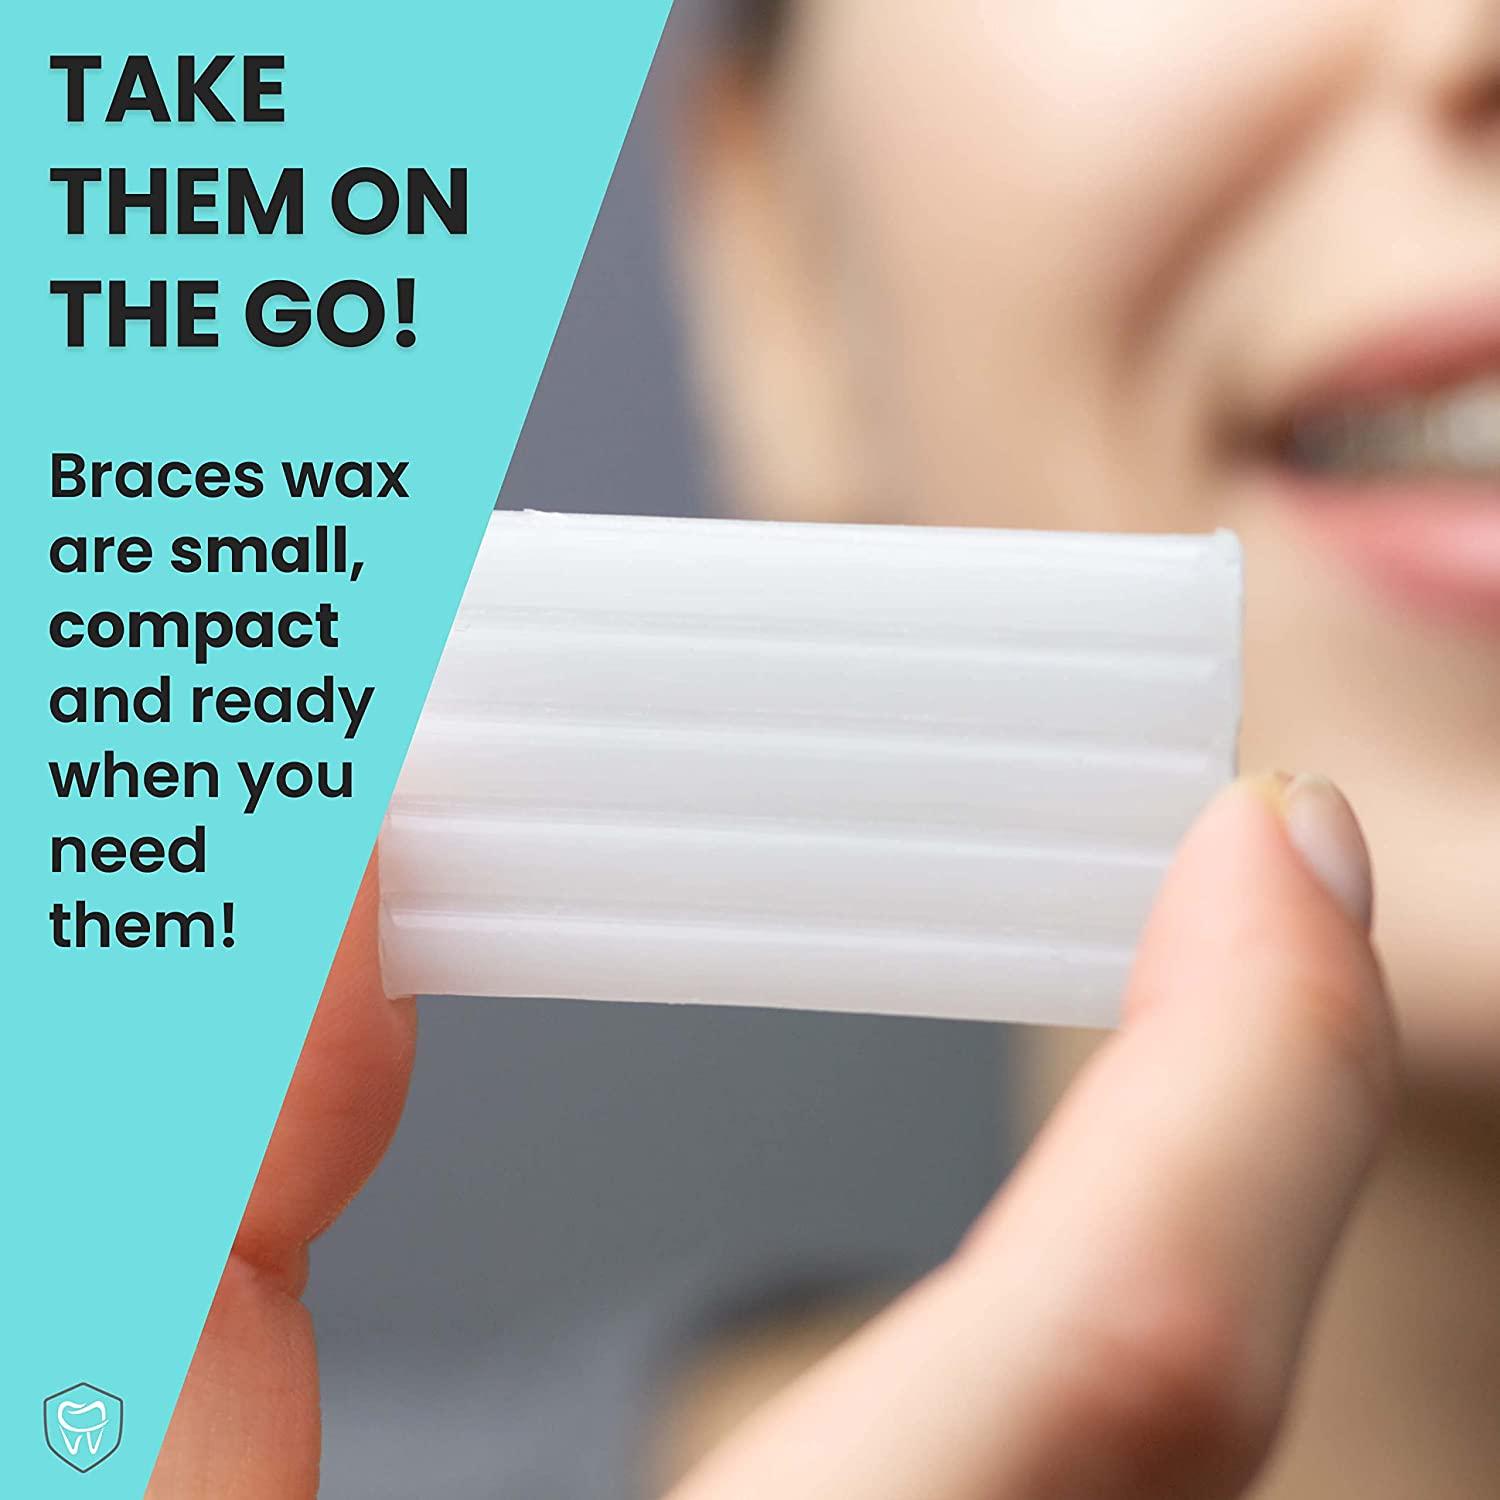 How To Use Wax For Braces